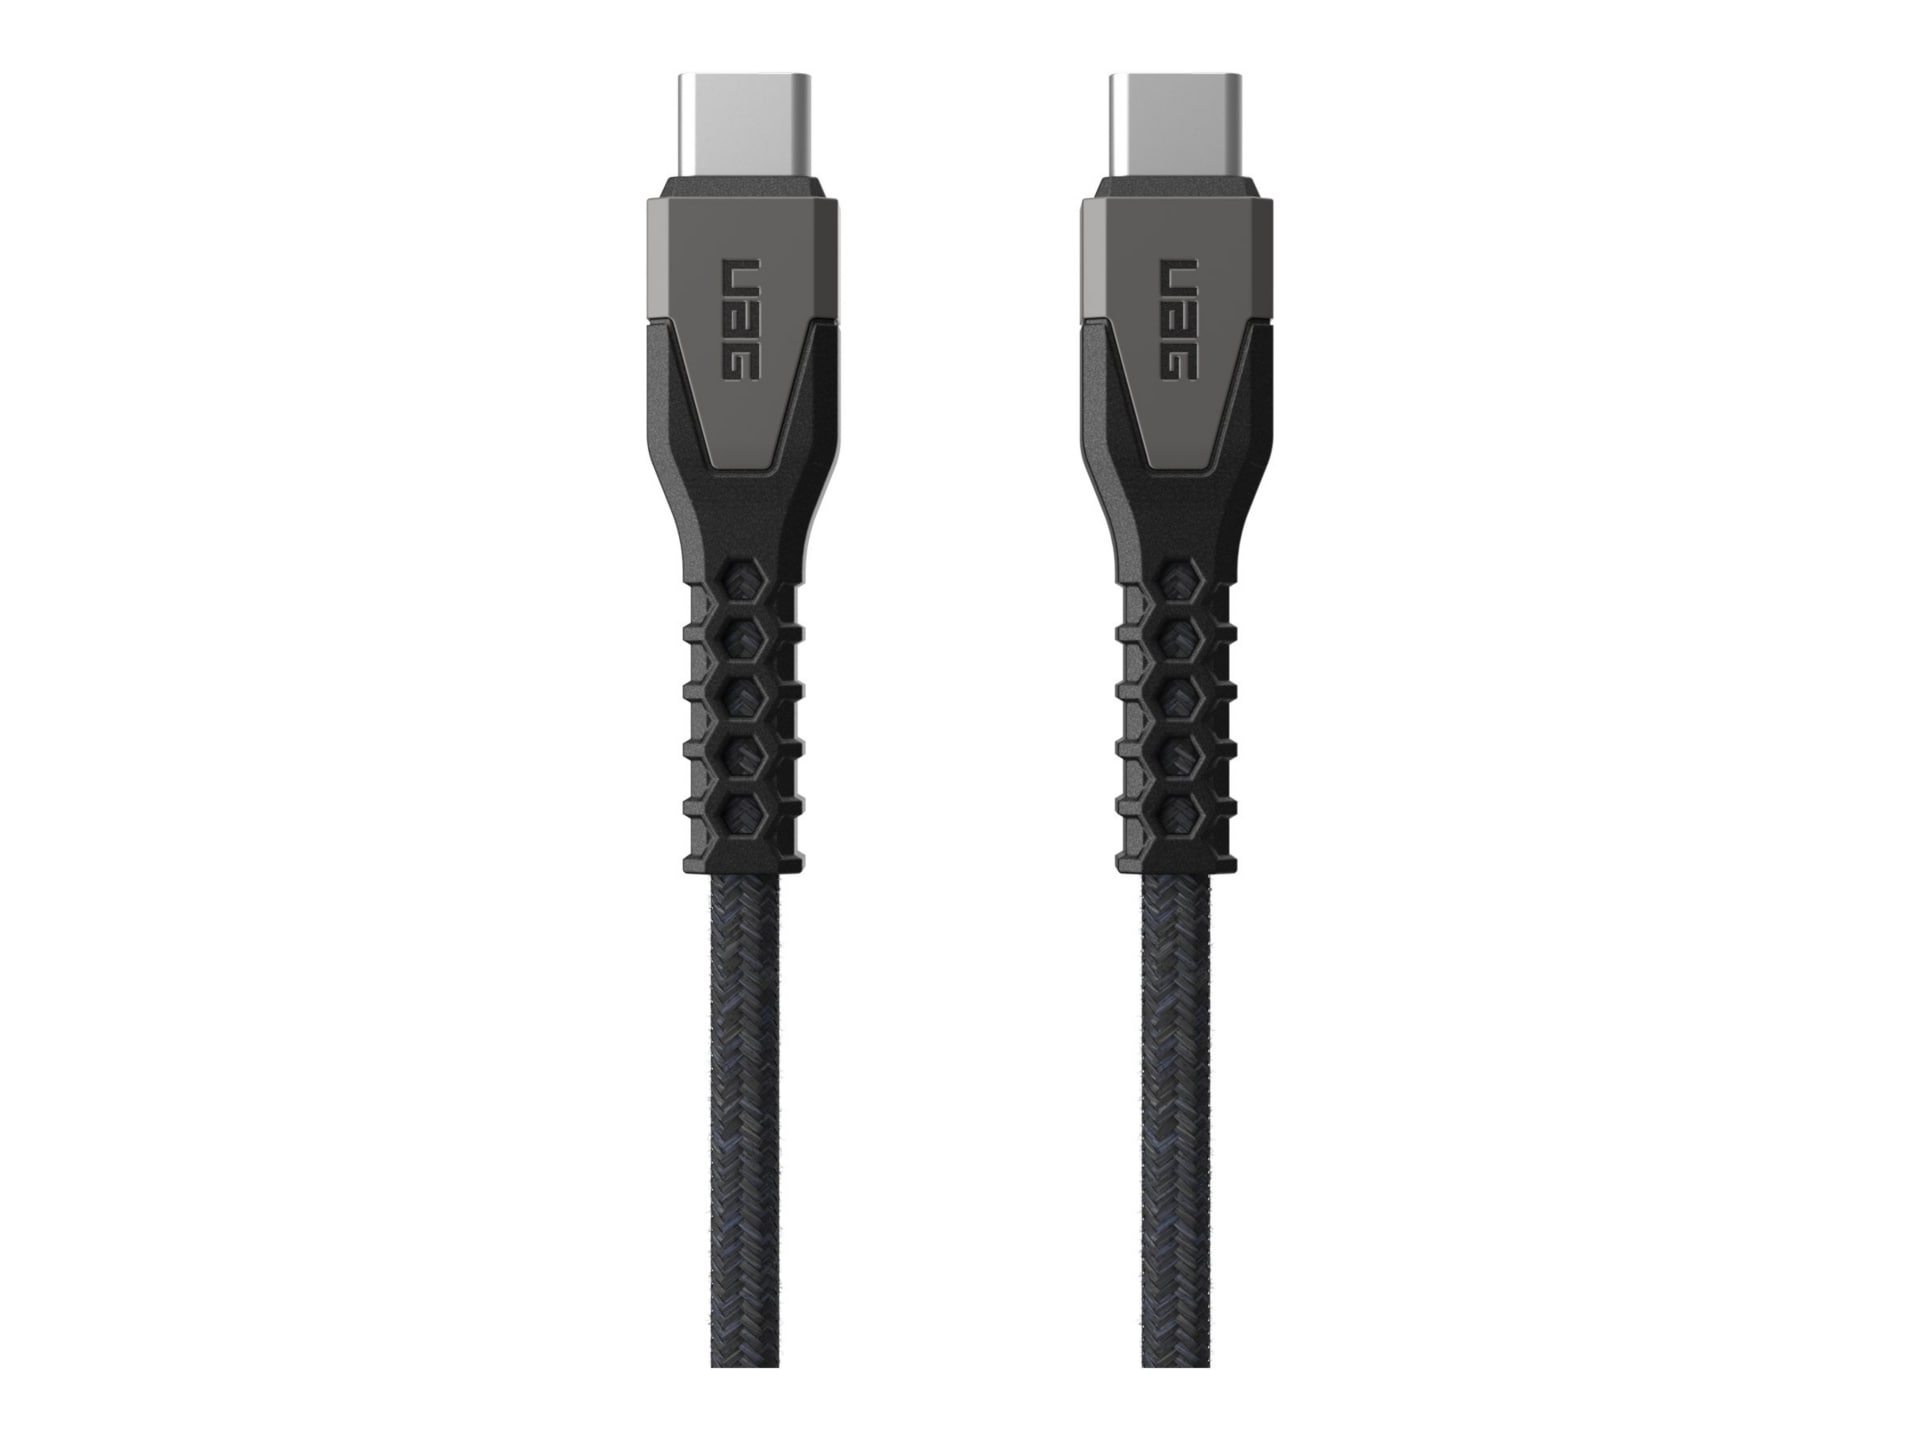 UAG Rugged 5ft Charging Cable USB-C to USB-C - Kevlar Core - Black/Grey